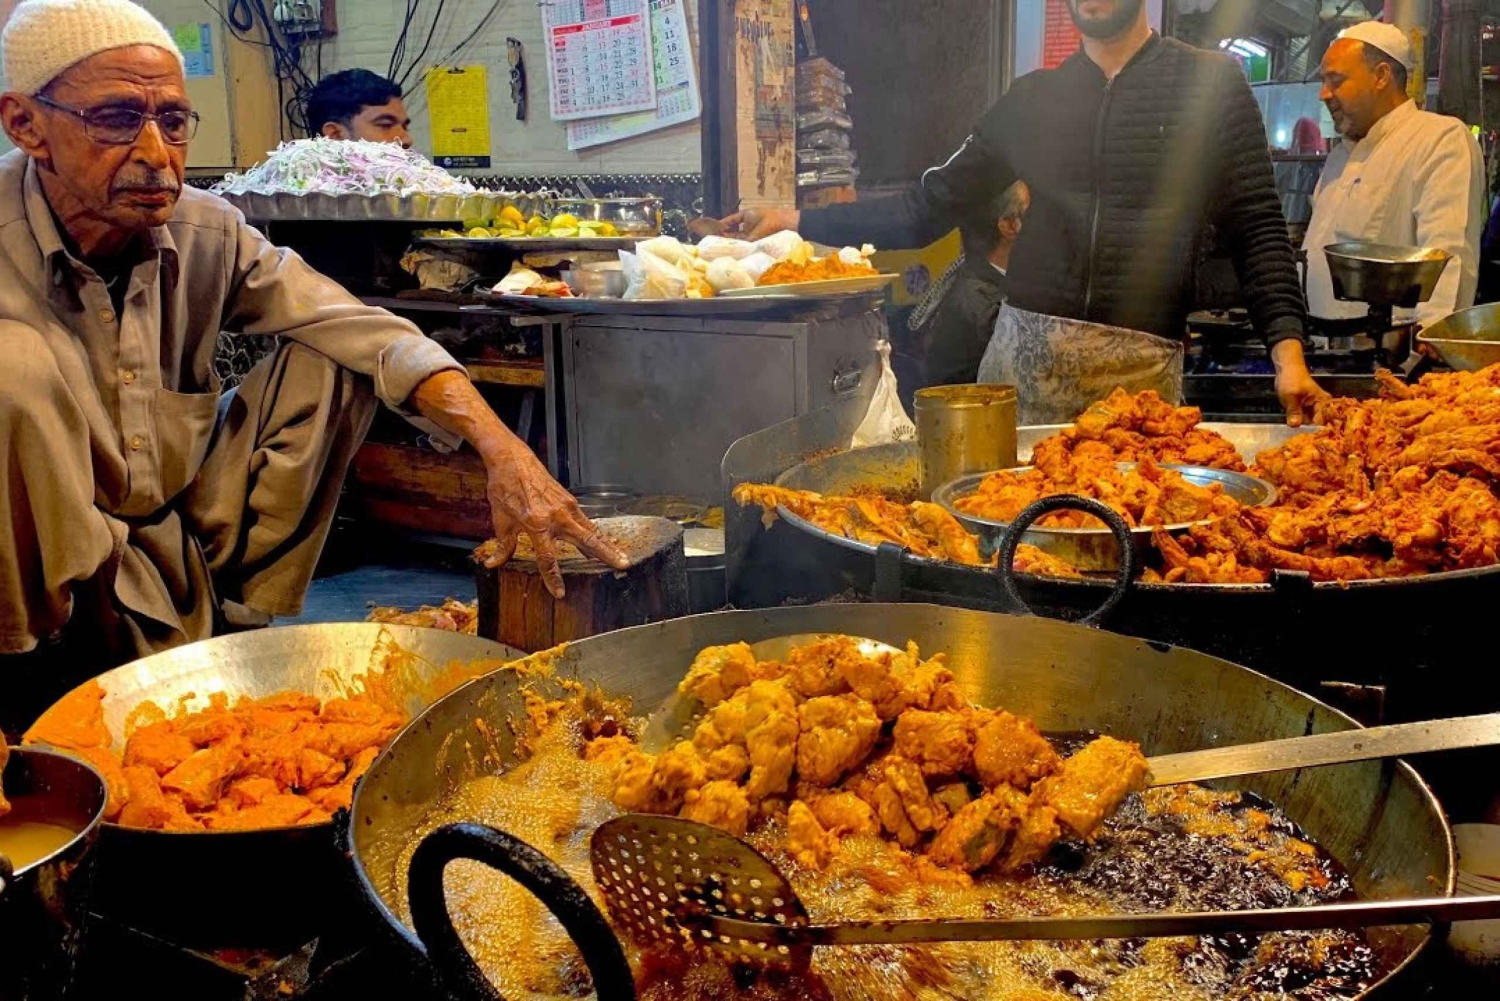 Delhi: Street Food Walking Tour of Old Delhi with Transfers